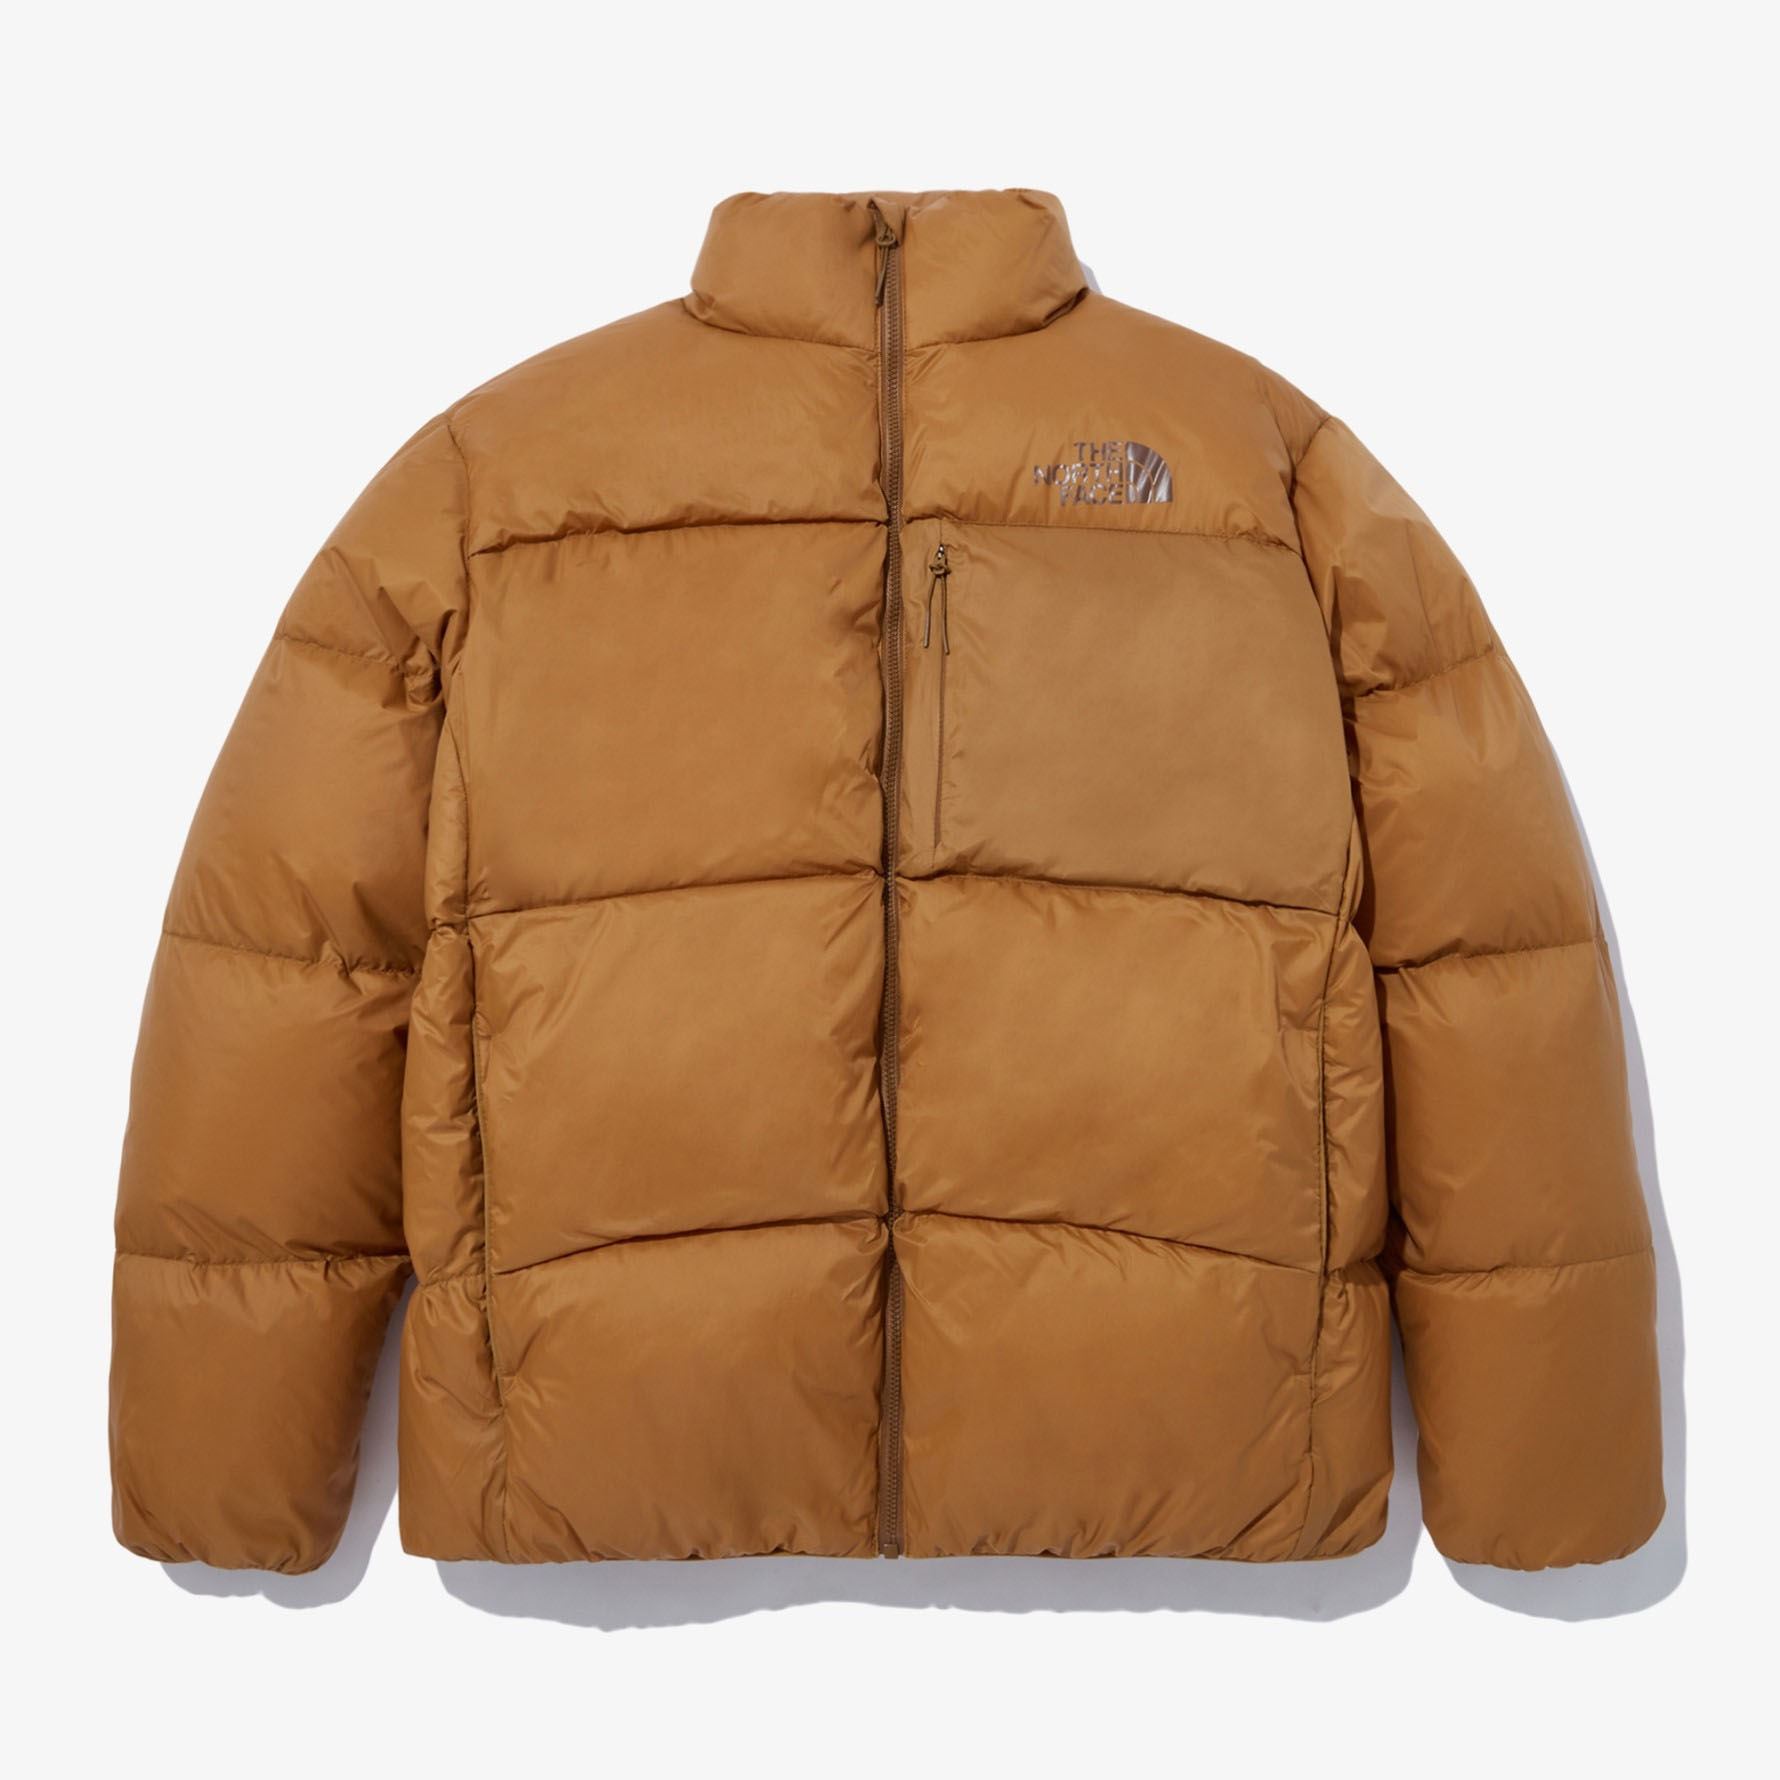 THE NORTH FACE ダウンジャケット VERMONT MD DOWN JACKET ショー...